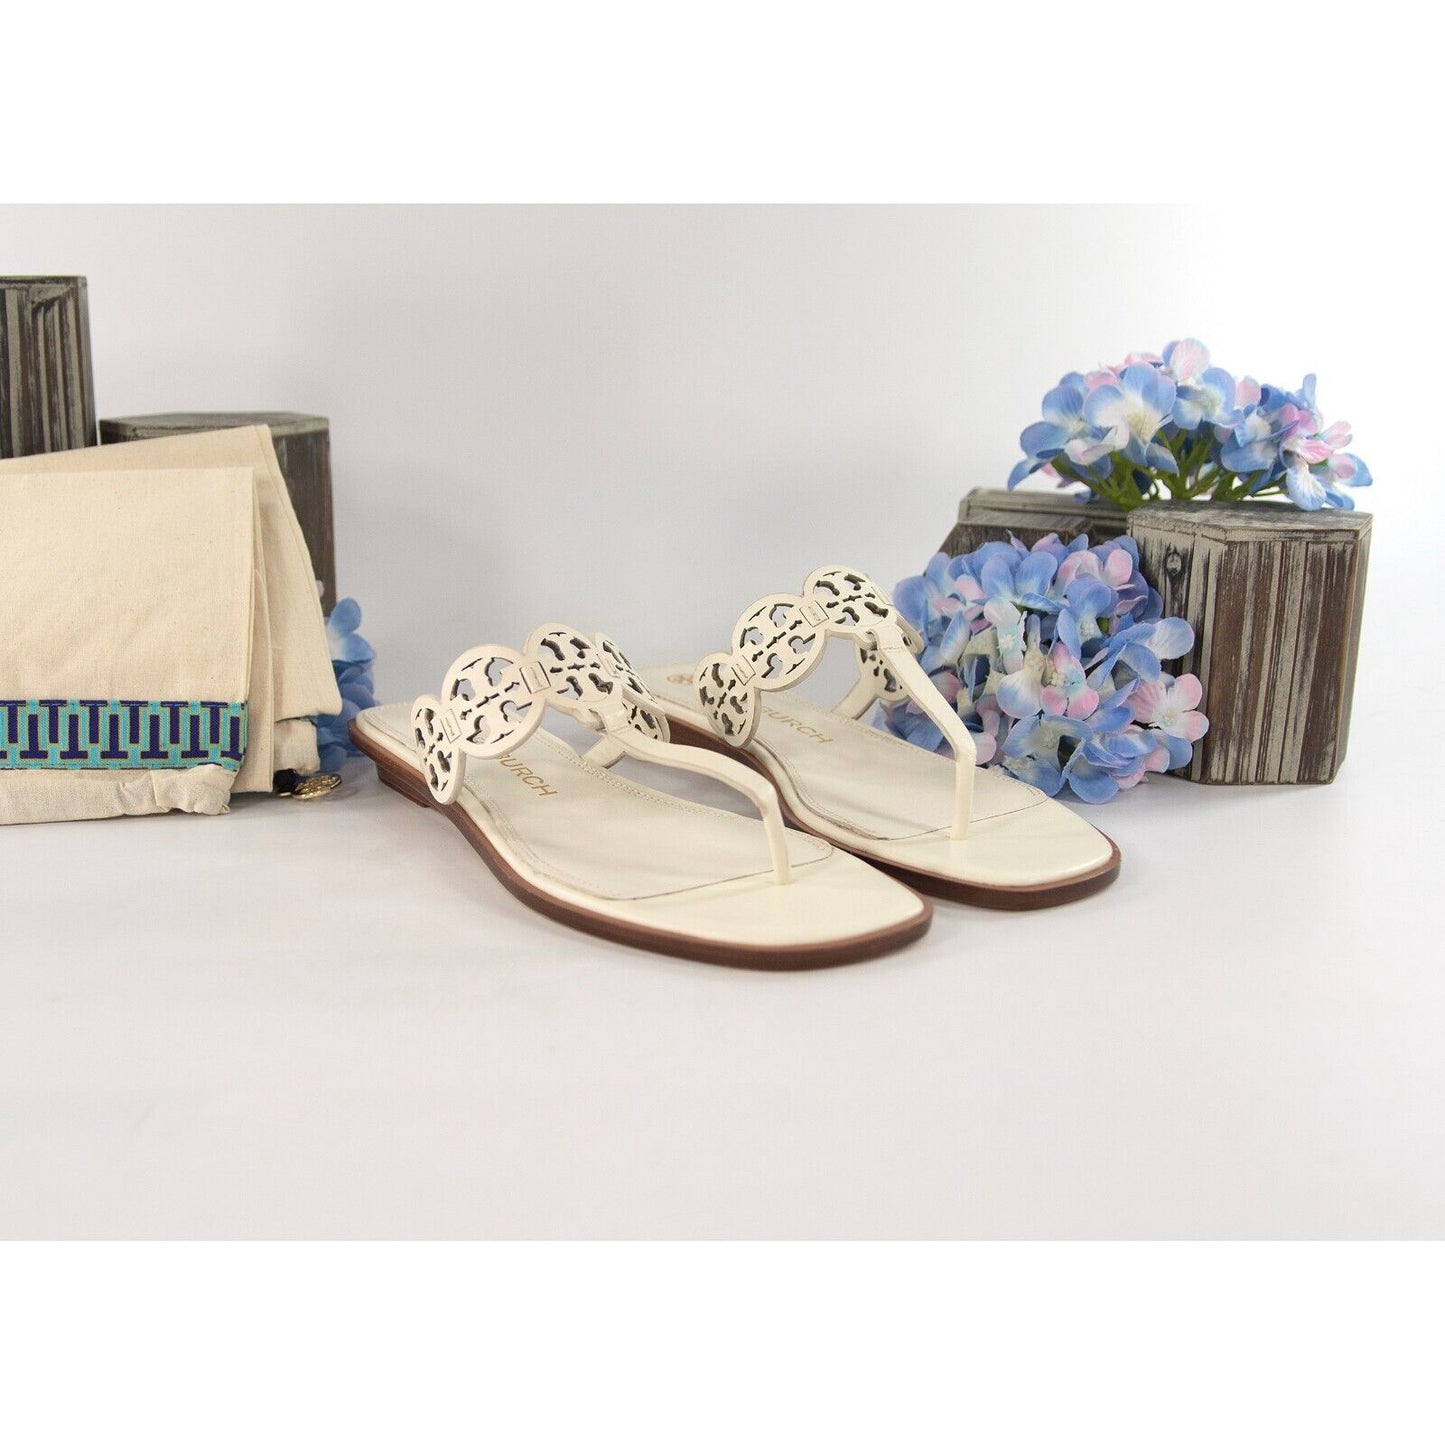 Tory Burch New Ivory Leather Tiny Miller Thong Sandals Size 9.5 NIB